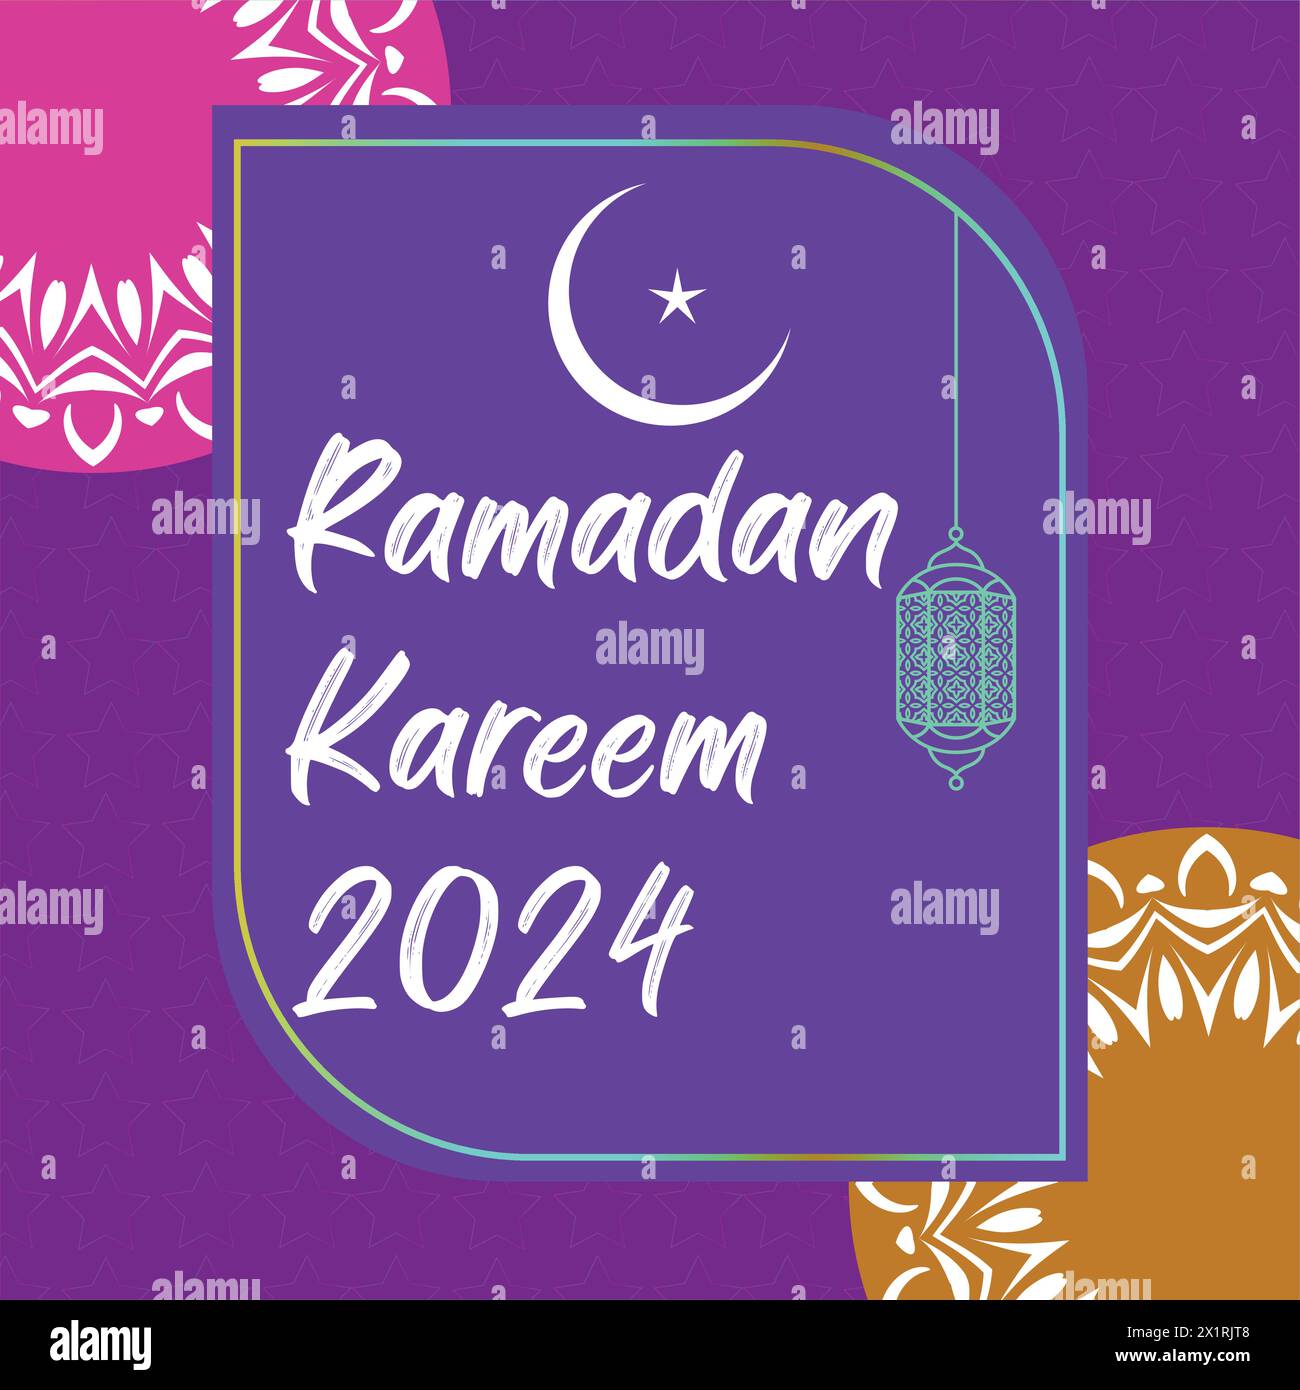 Celebrate Ramadan 2024 with this elegant vector! A radiant crescent moon and intricate lantern adorn a royal blue backdrop, framed by ornate patterns. Stock Vector